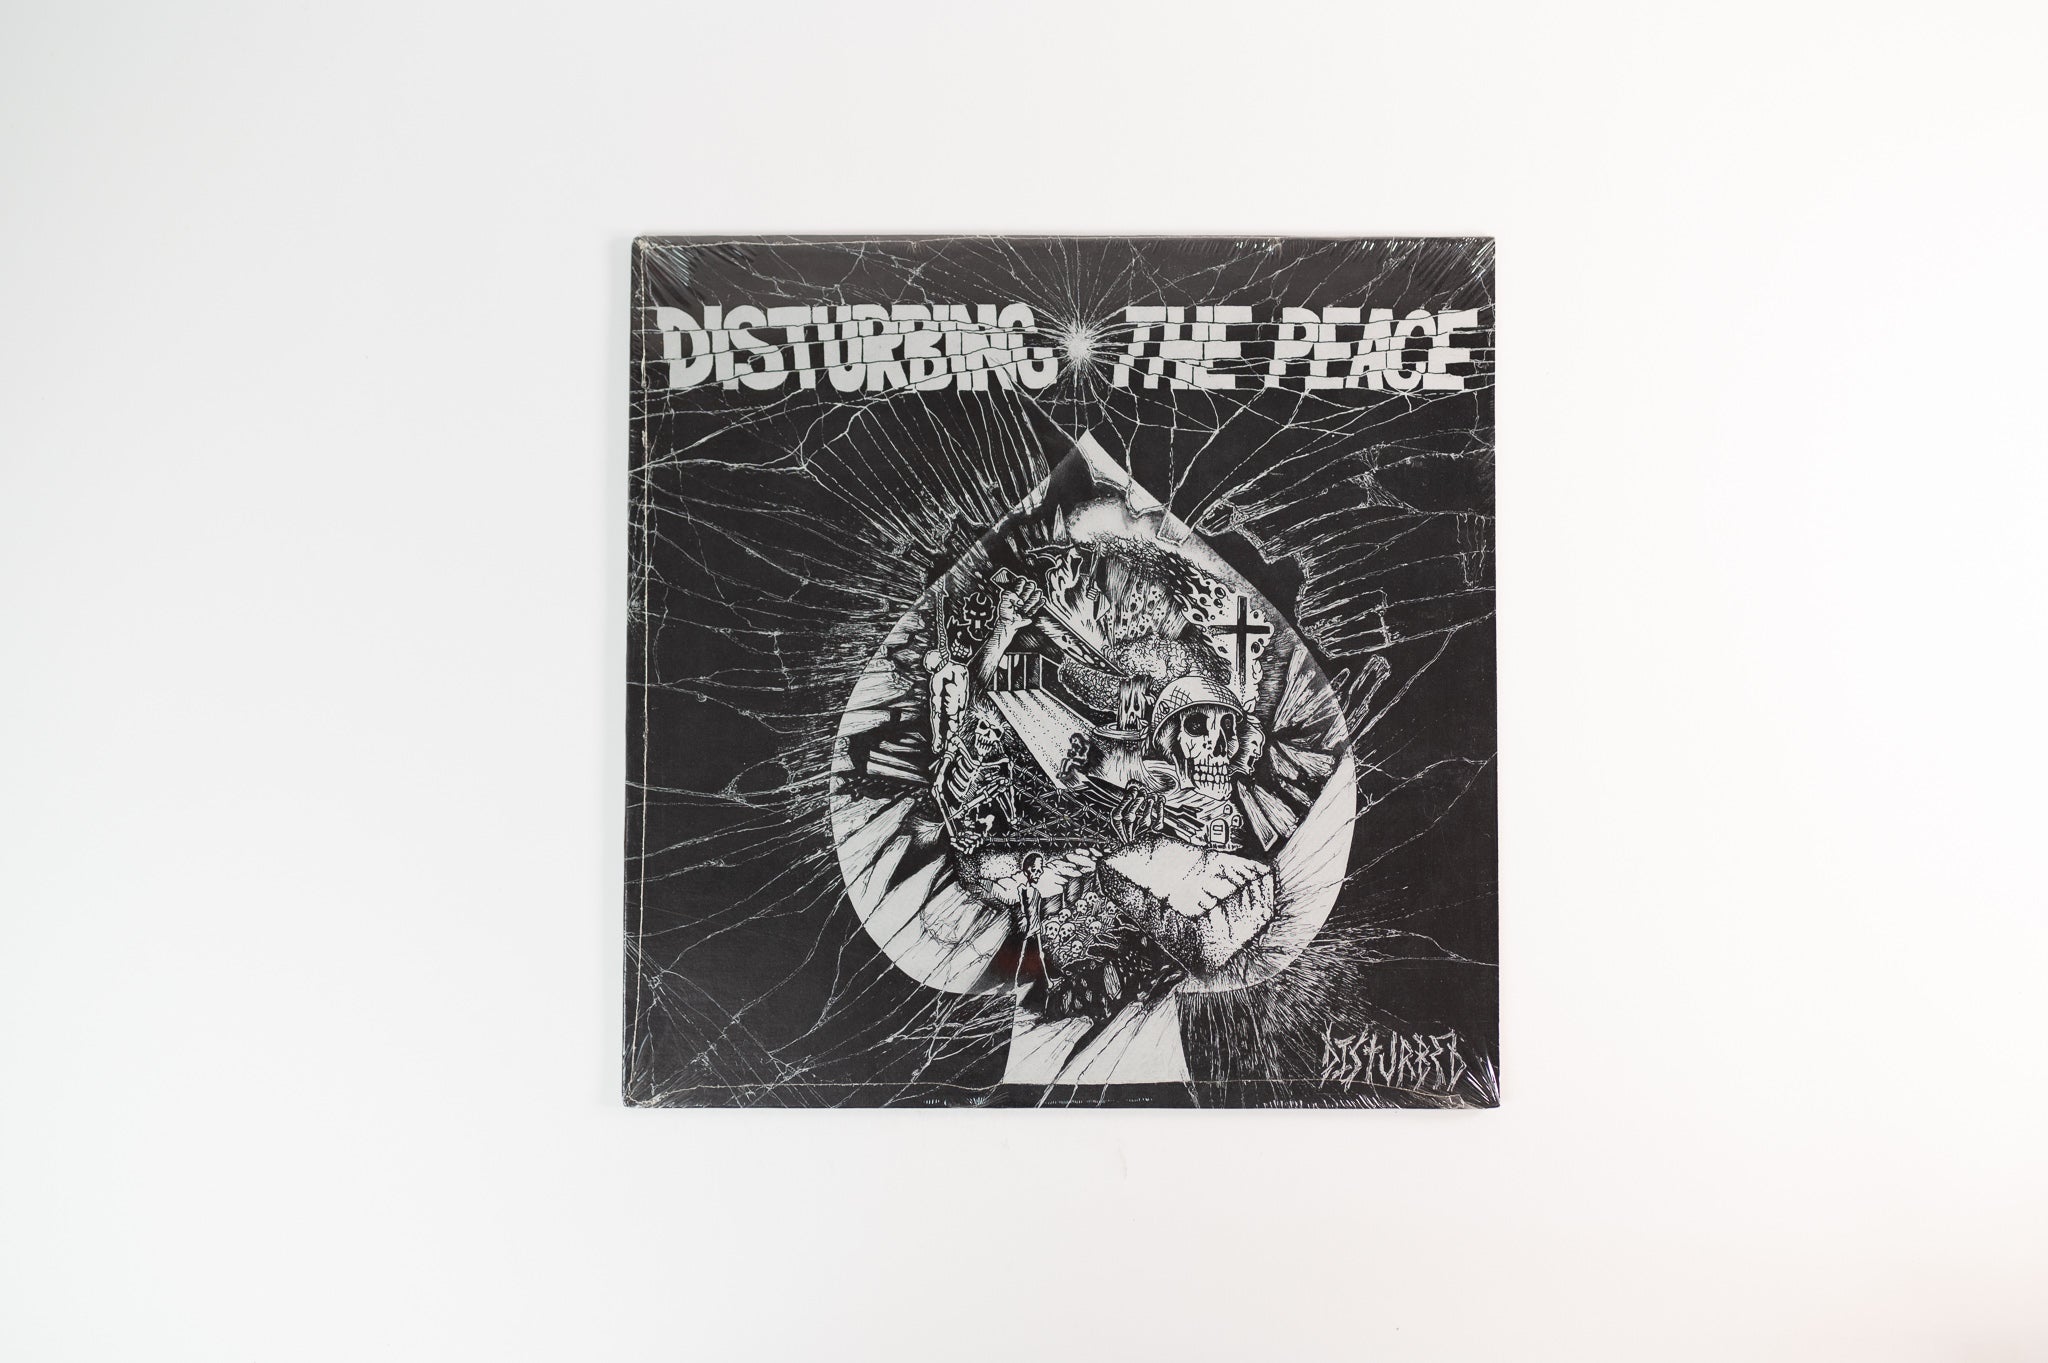 Disturbed - Disturbing The Peace on channel 83 Records - Sealed